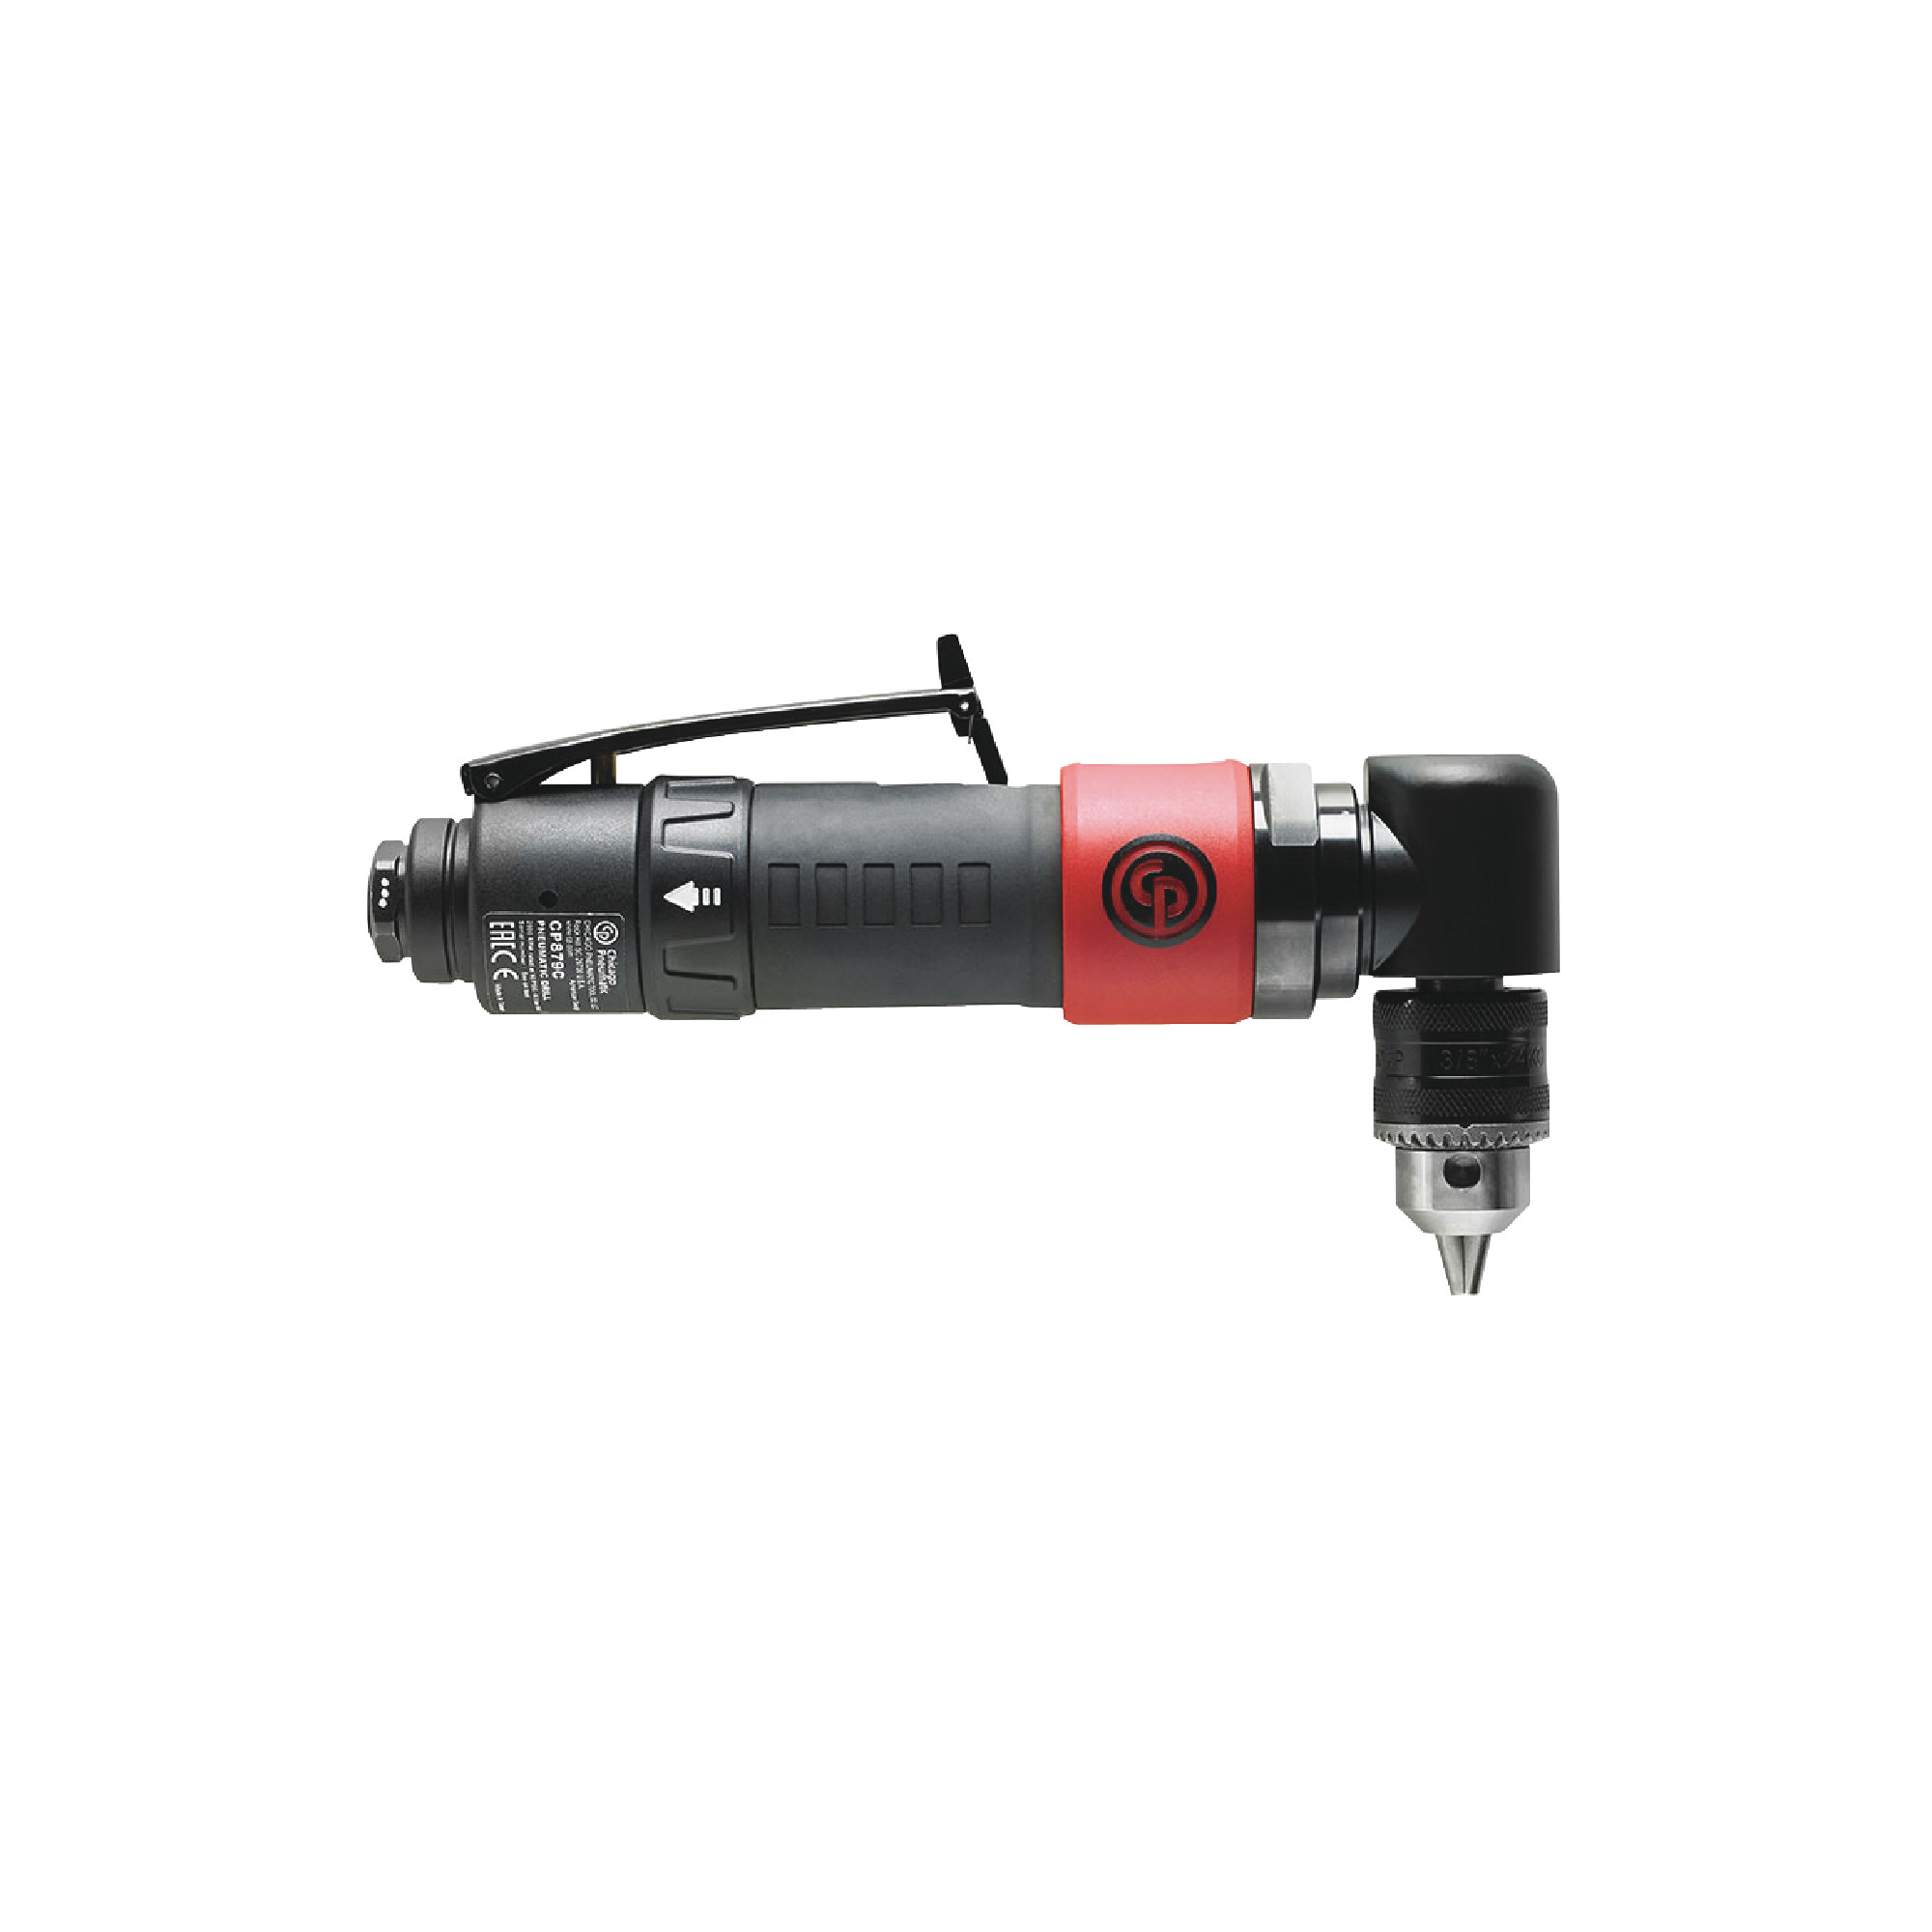 3/8" Reversible Angle Drill